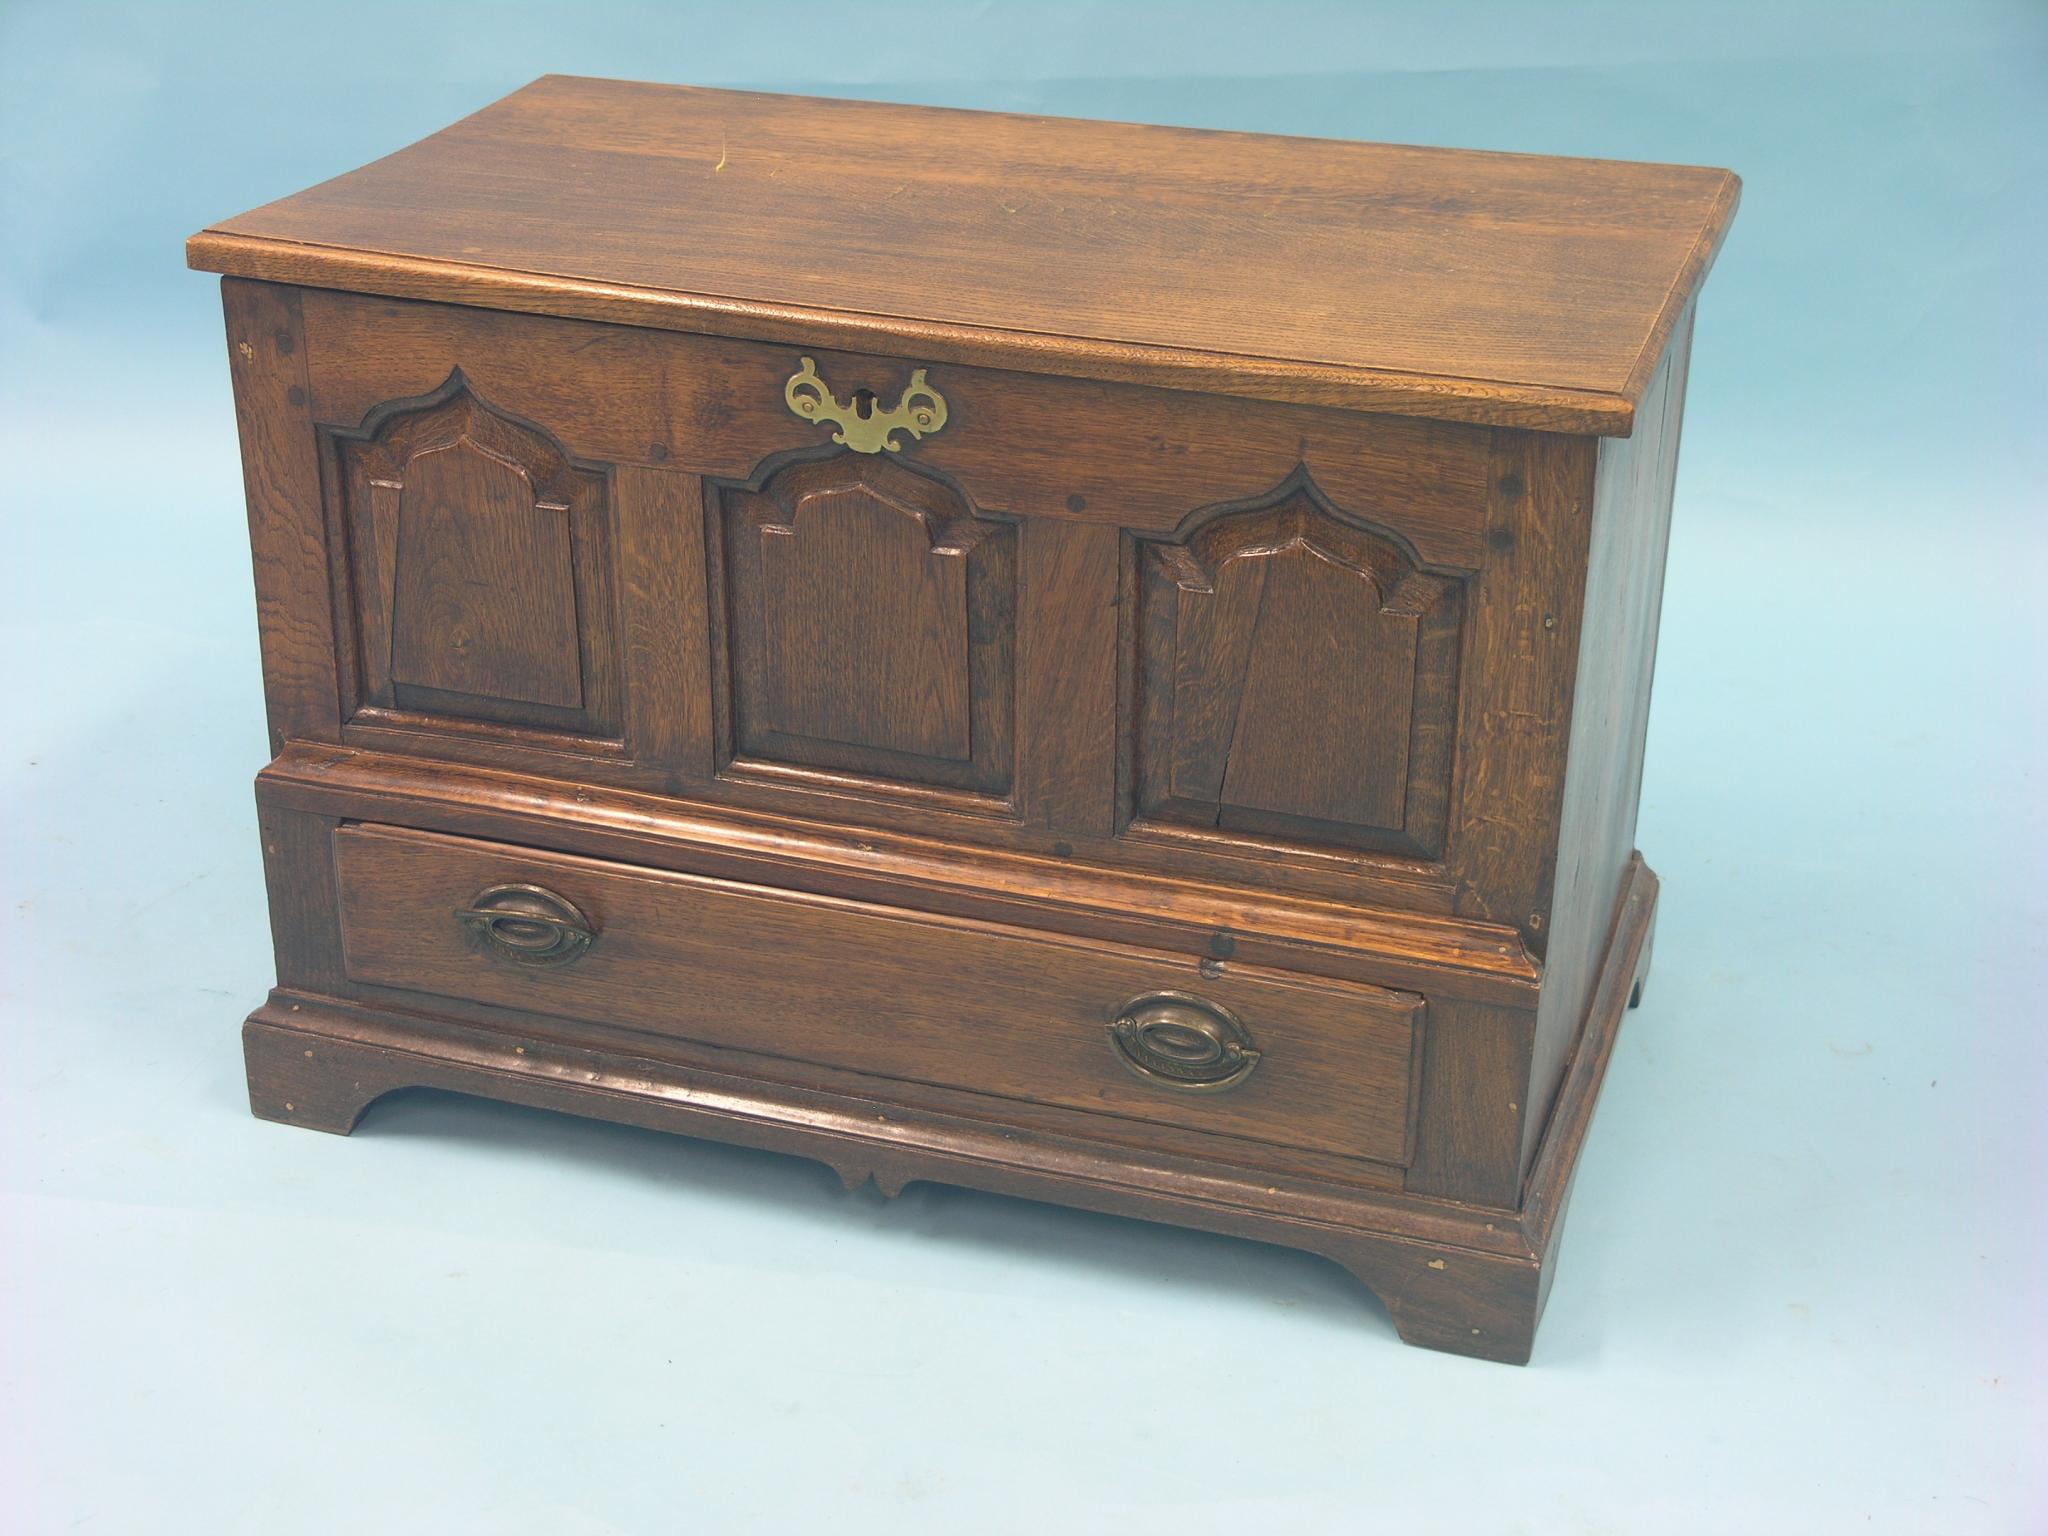 A Georgian-style oak coffer, frontage with fielded and arched panels, detachable top, single